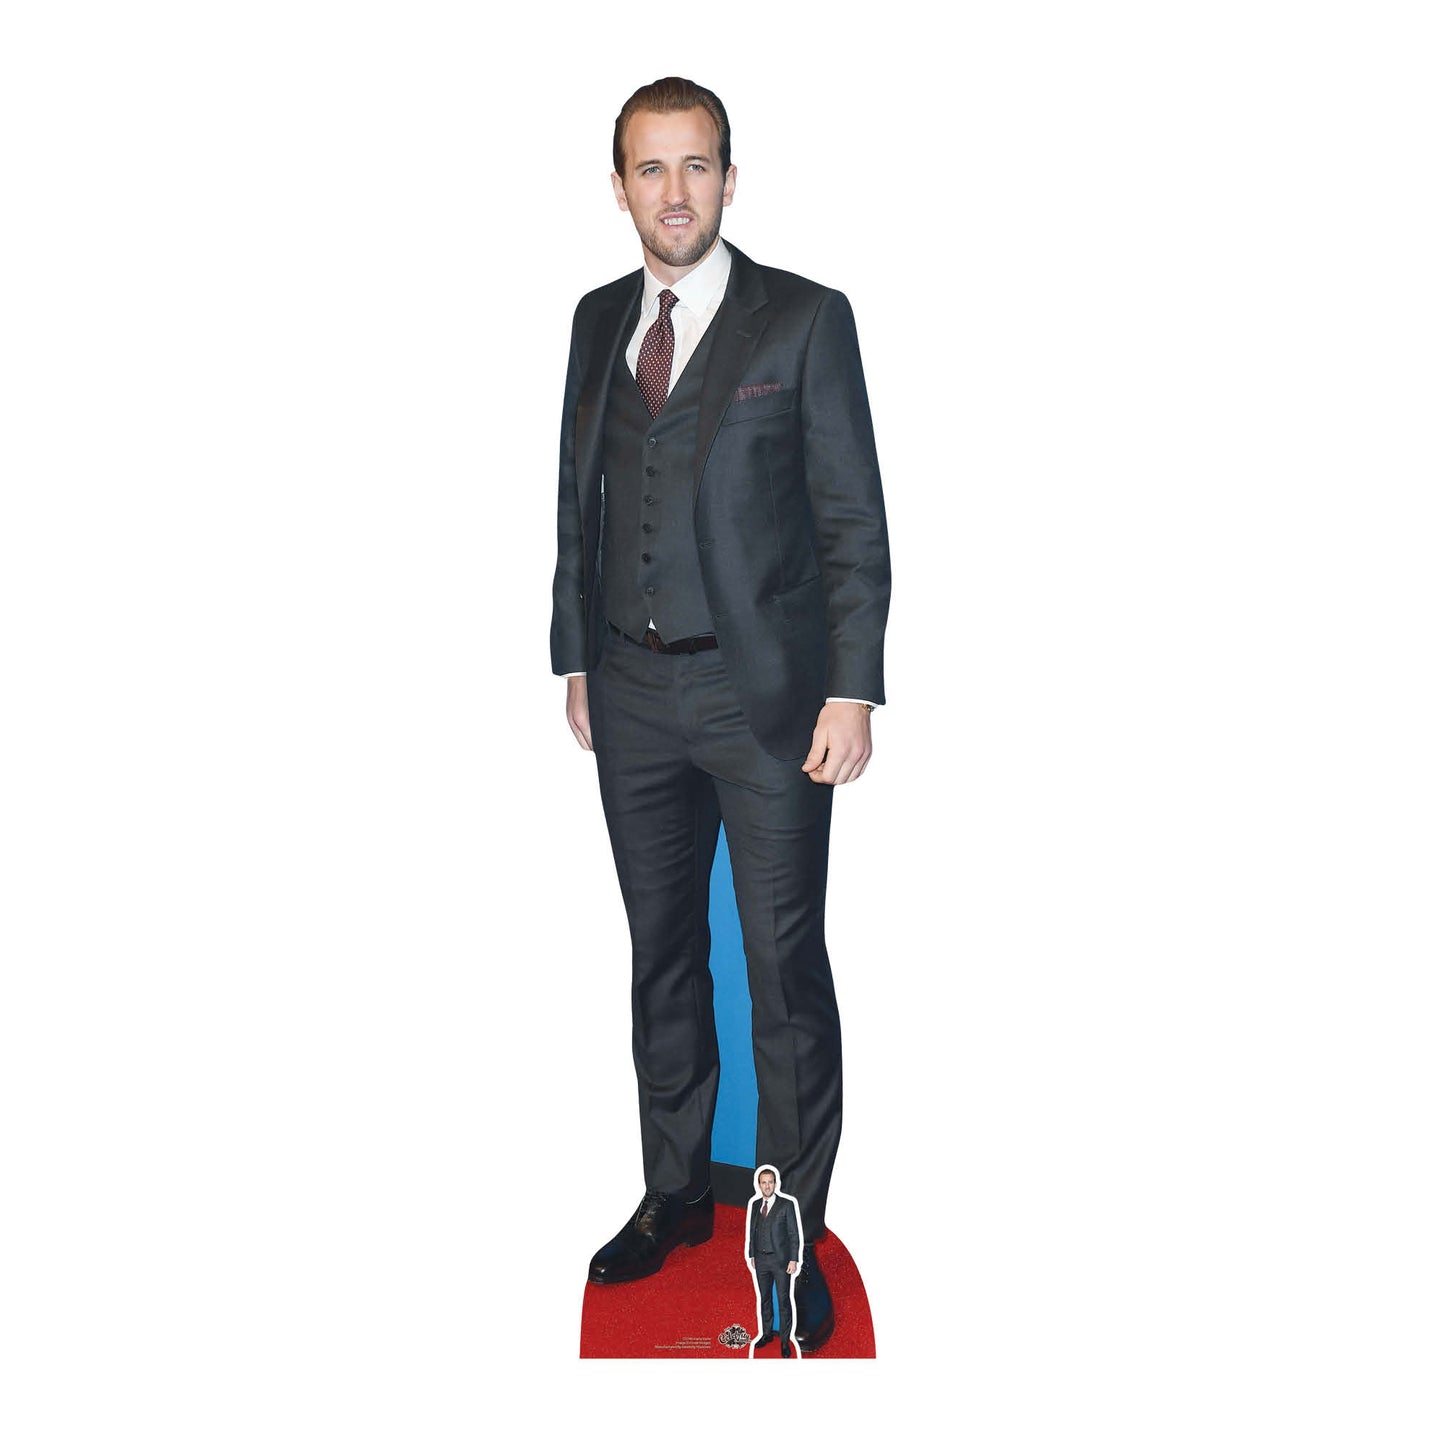 CS740 Harry Kane Height 187cm Lifesize Cardboard Cut Out With Mini